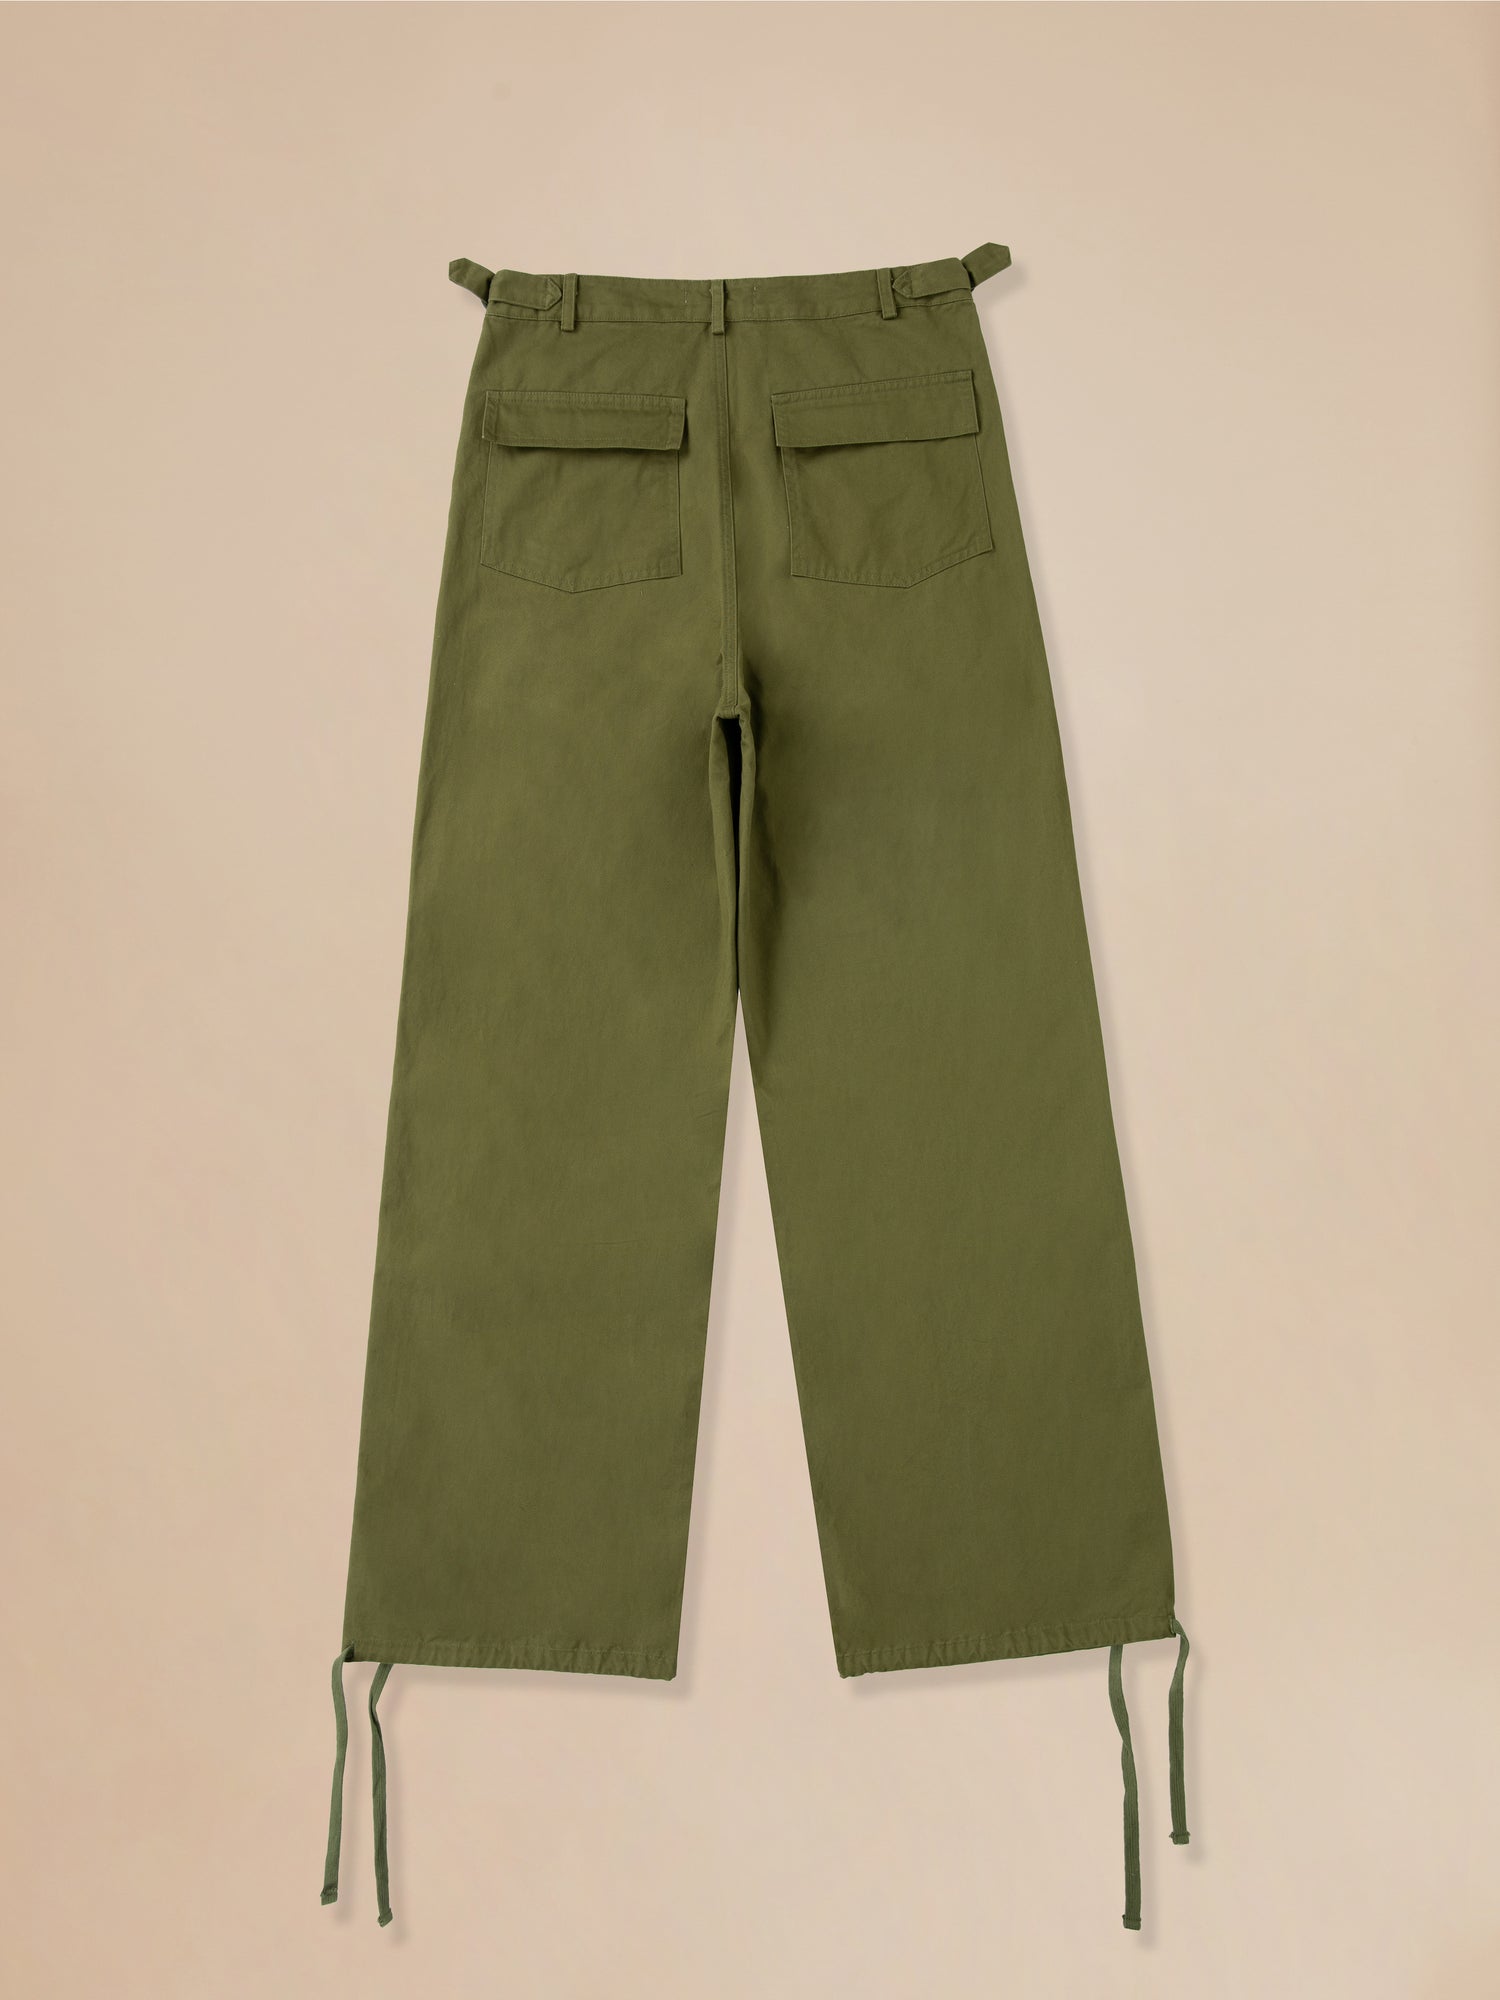 A pair of Found Parachute Cargo Twill Pants in olive green.